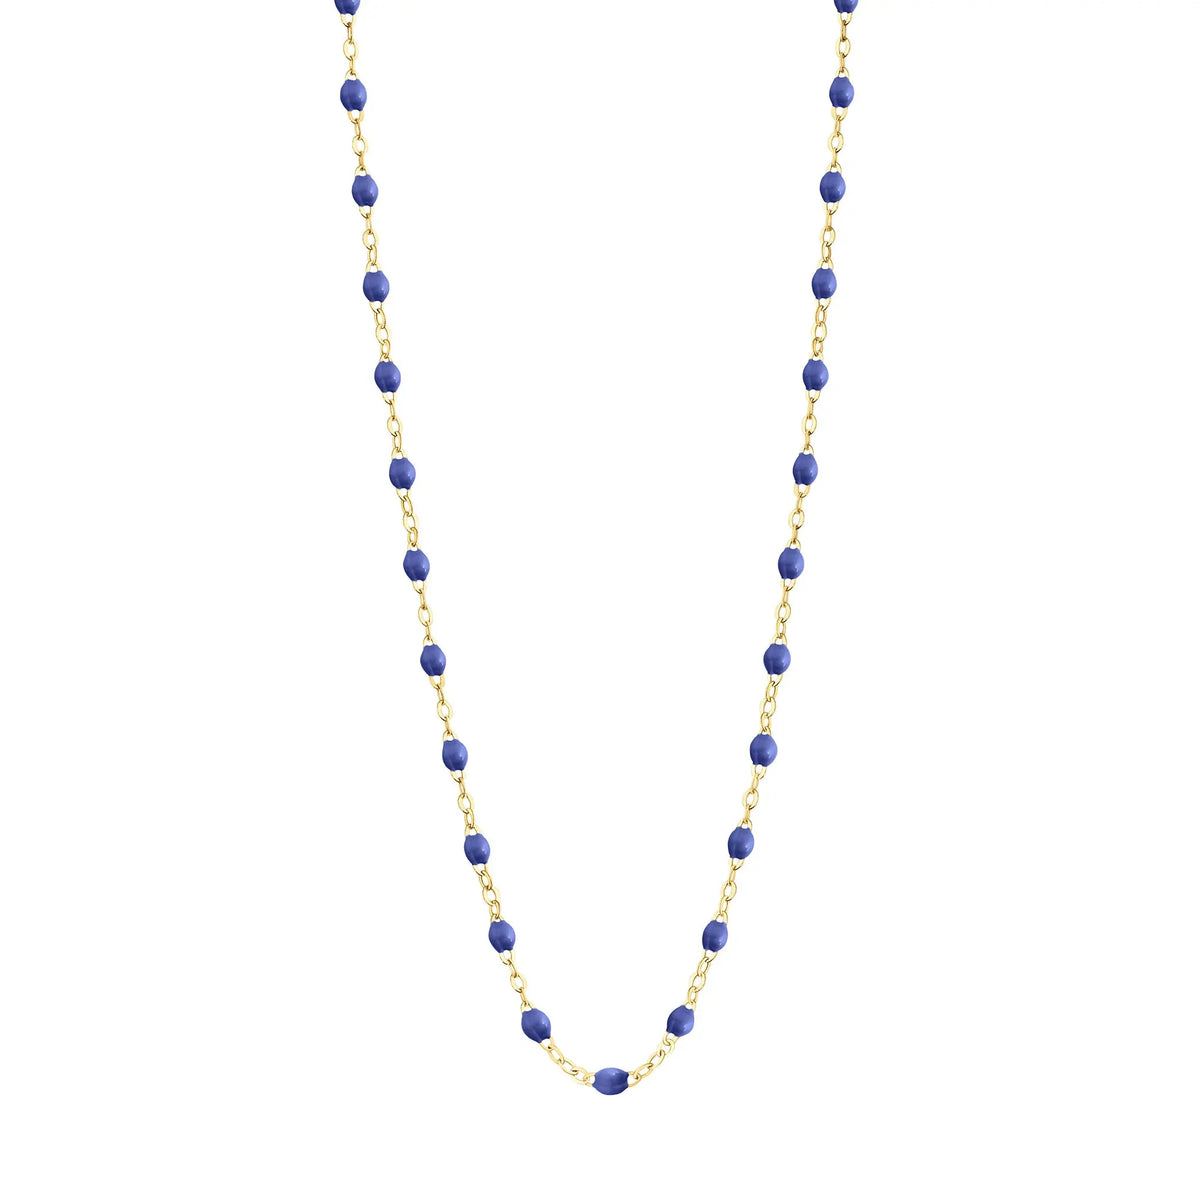 Stack you necklace layers with this versatile beaded chain! The Classic Gigi Necklace by gigi CLOZEAU features 18 carat yellow gold, and striking Blue resin jewels for an everyday effortless appearance. Handcrafted in 18k yellow gold. The beads measure 1.50mm in diameter and is finished with a spring ring clasp. The length is 16.7 inches.